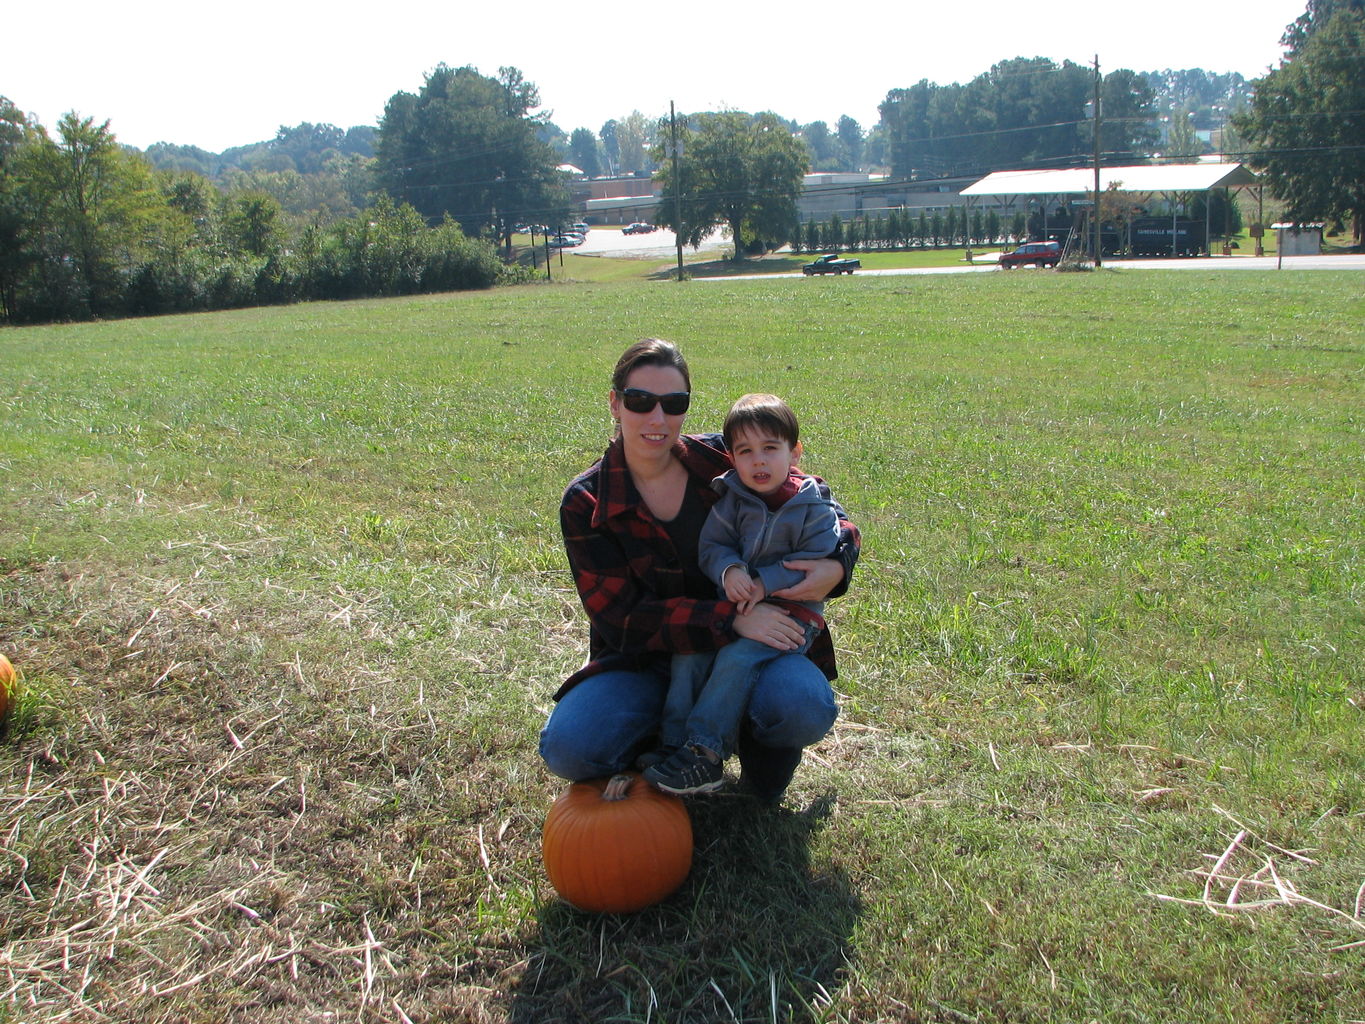 The Punkin' Patch
